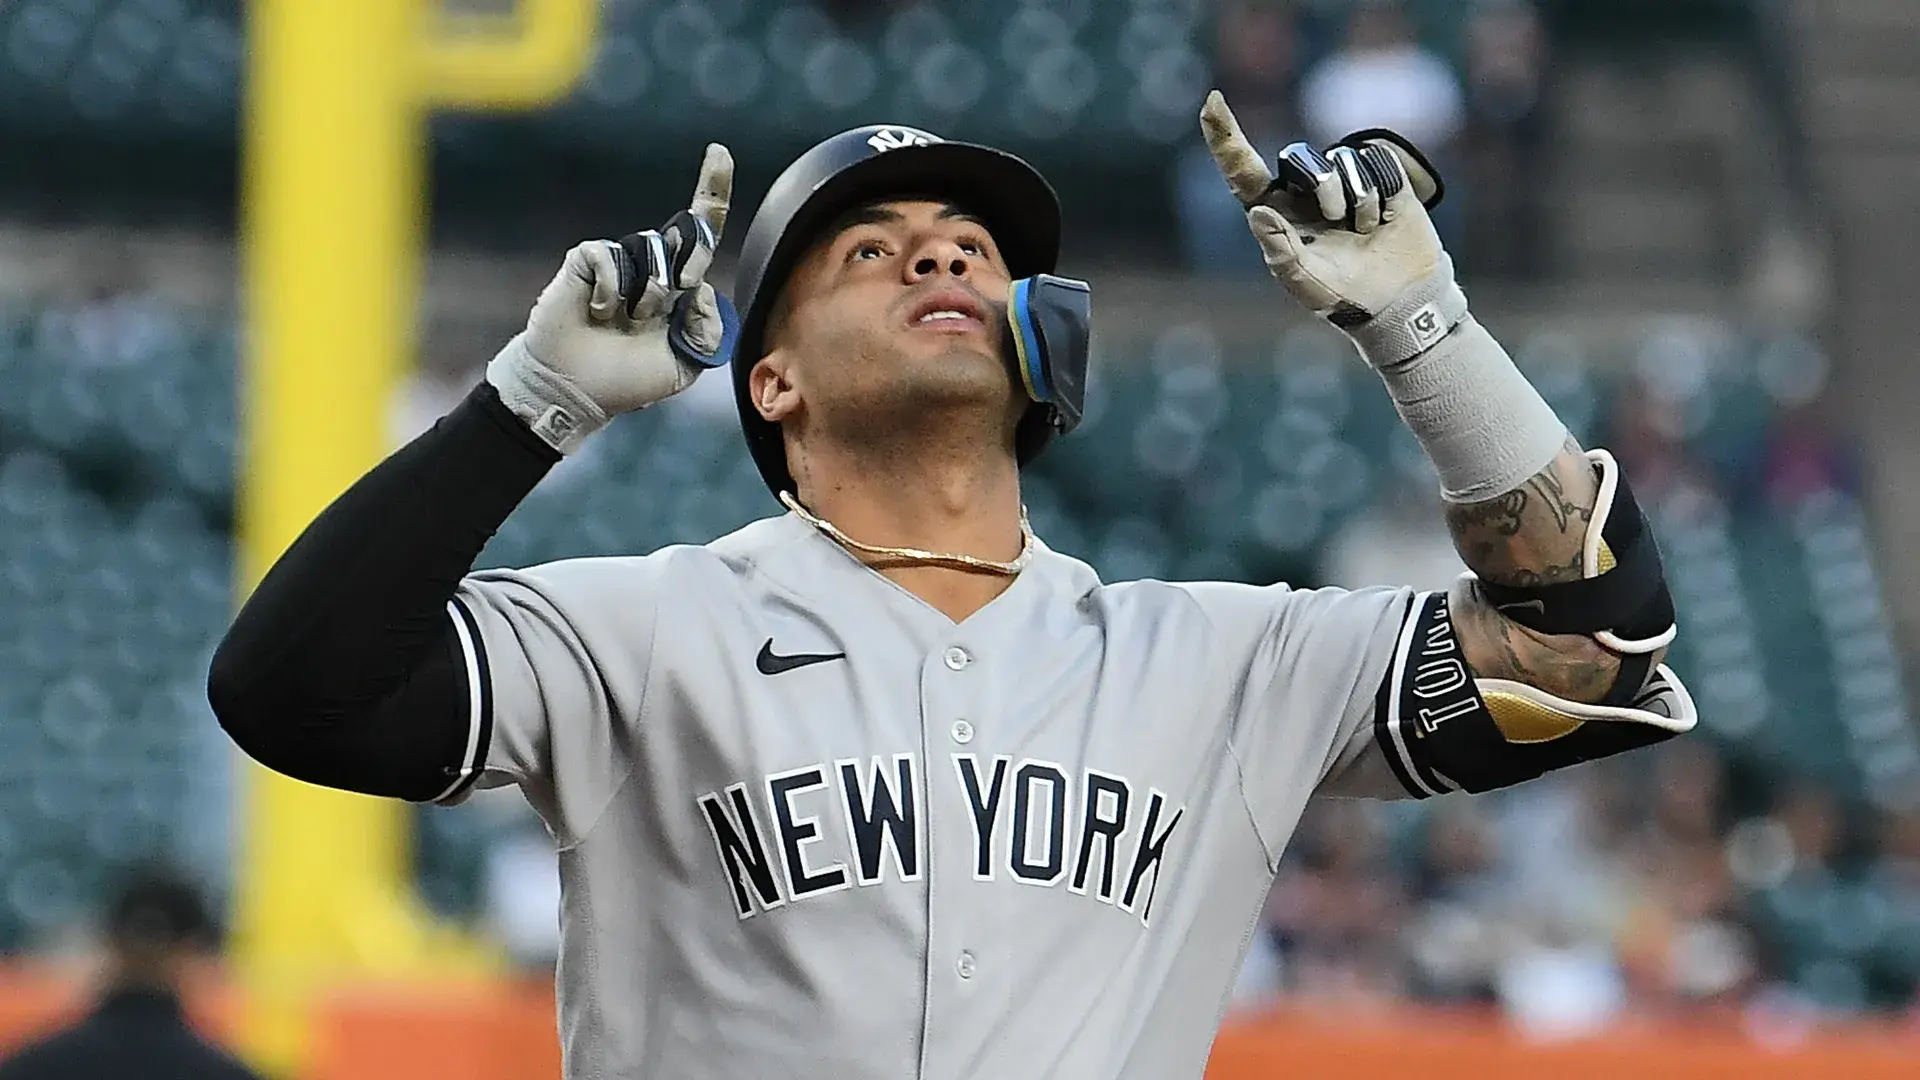 Aug 30, 2023; Detroit, Michigan, USA; New York Yankees second baseman Gleyber Torres (25) celebrates in the dugout after hitting a home run against the Detroit Tigers in the fourth inning at Comerica Park. Mandatory Credit: Lon Horwedel-USA TODAY Sports / © Lon Horwedel-USA TODAY Sports